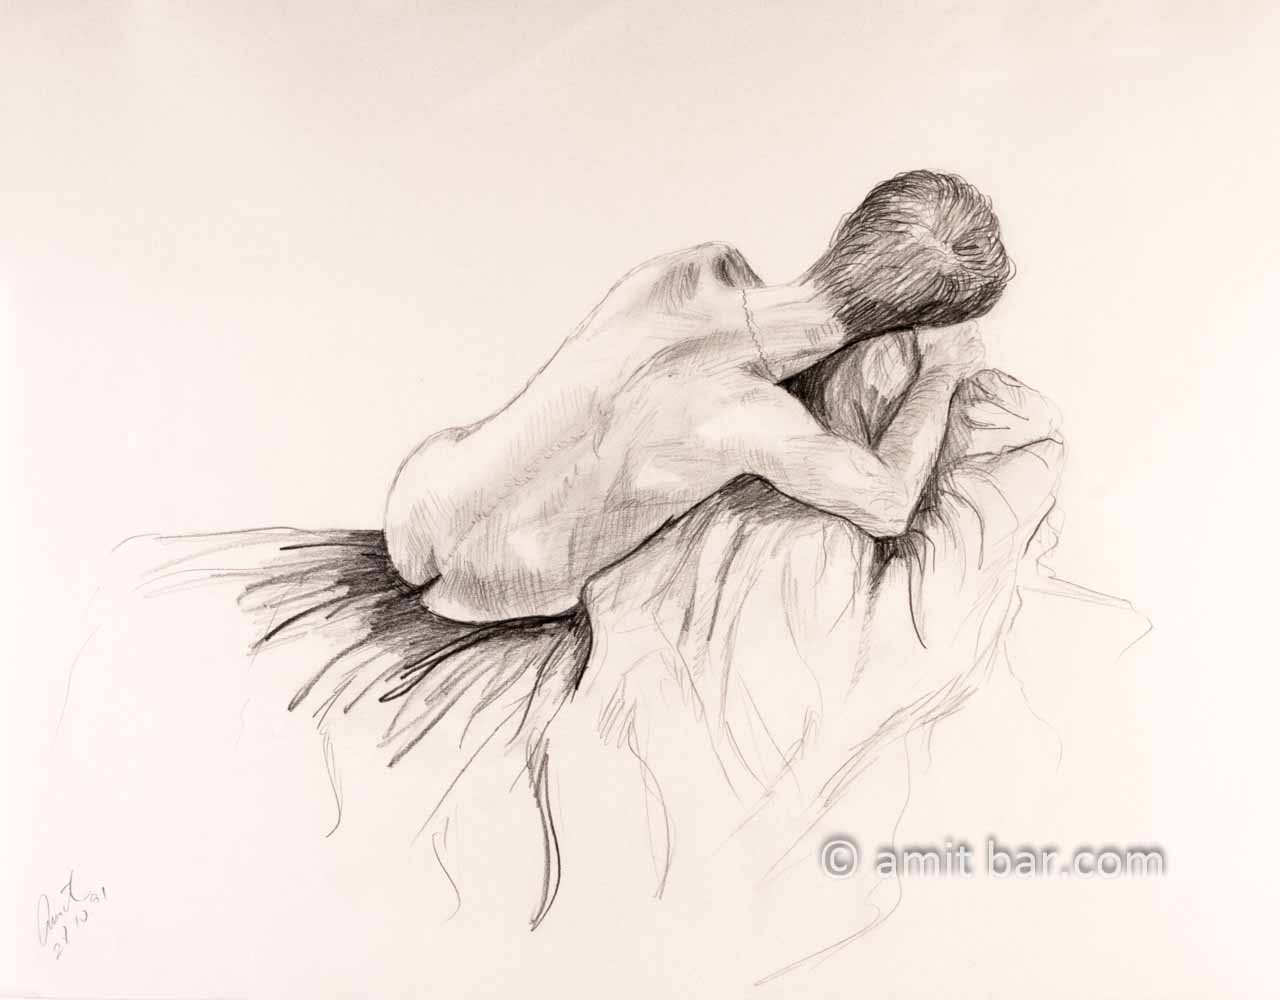 Nude man from behind. Pencil drawing